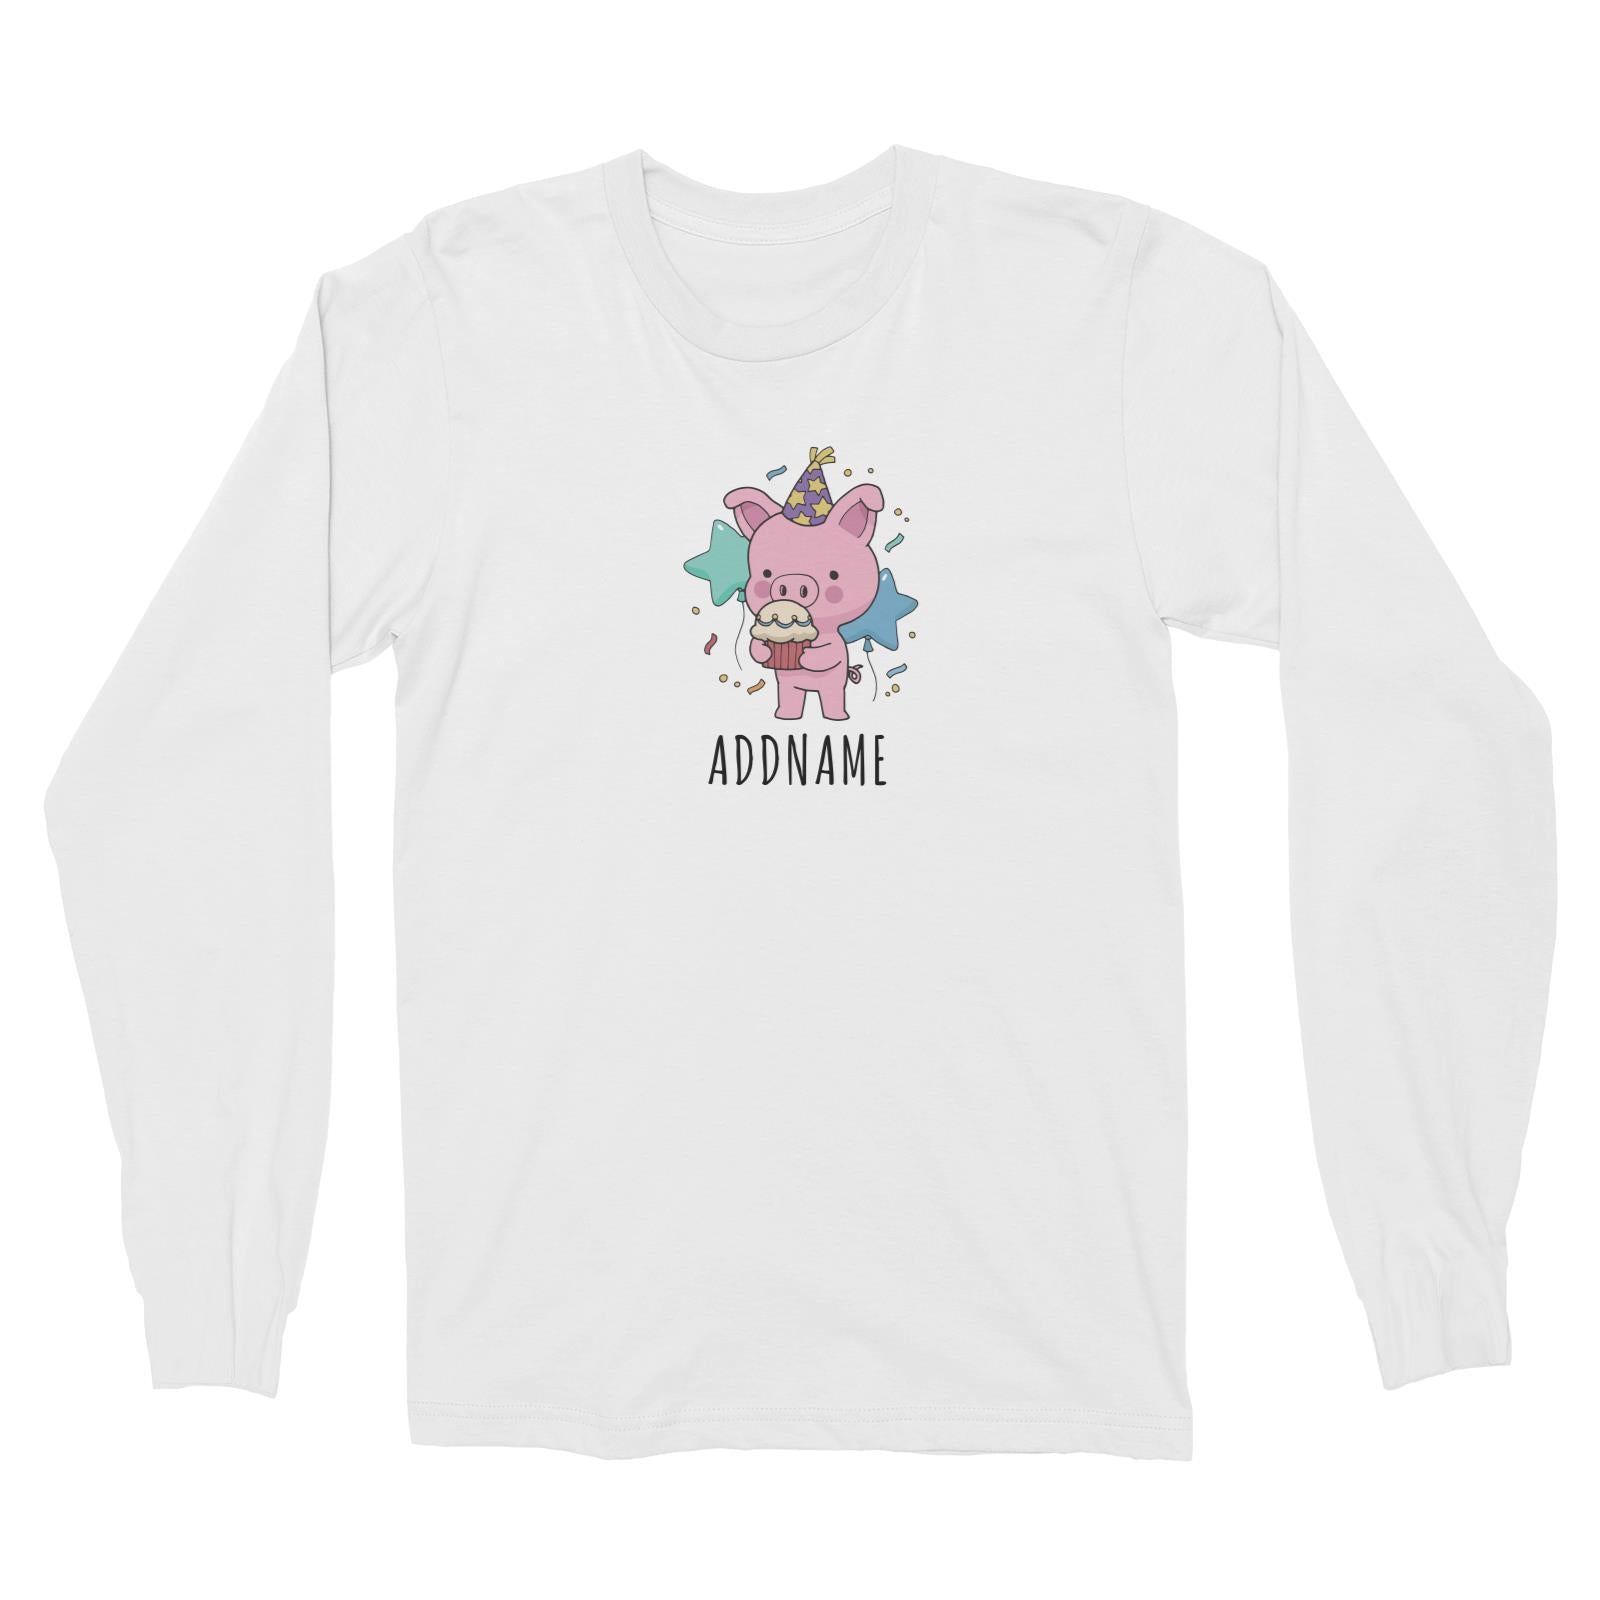 Birthday Sketch Animals Pig with Party Hat Eating Cupcake Addname Long Sleeve Unisex T-Shirt